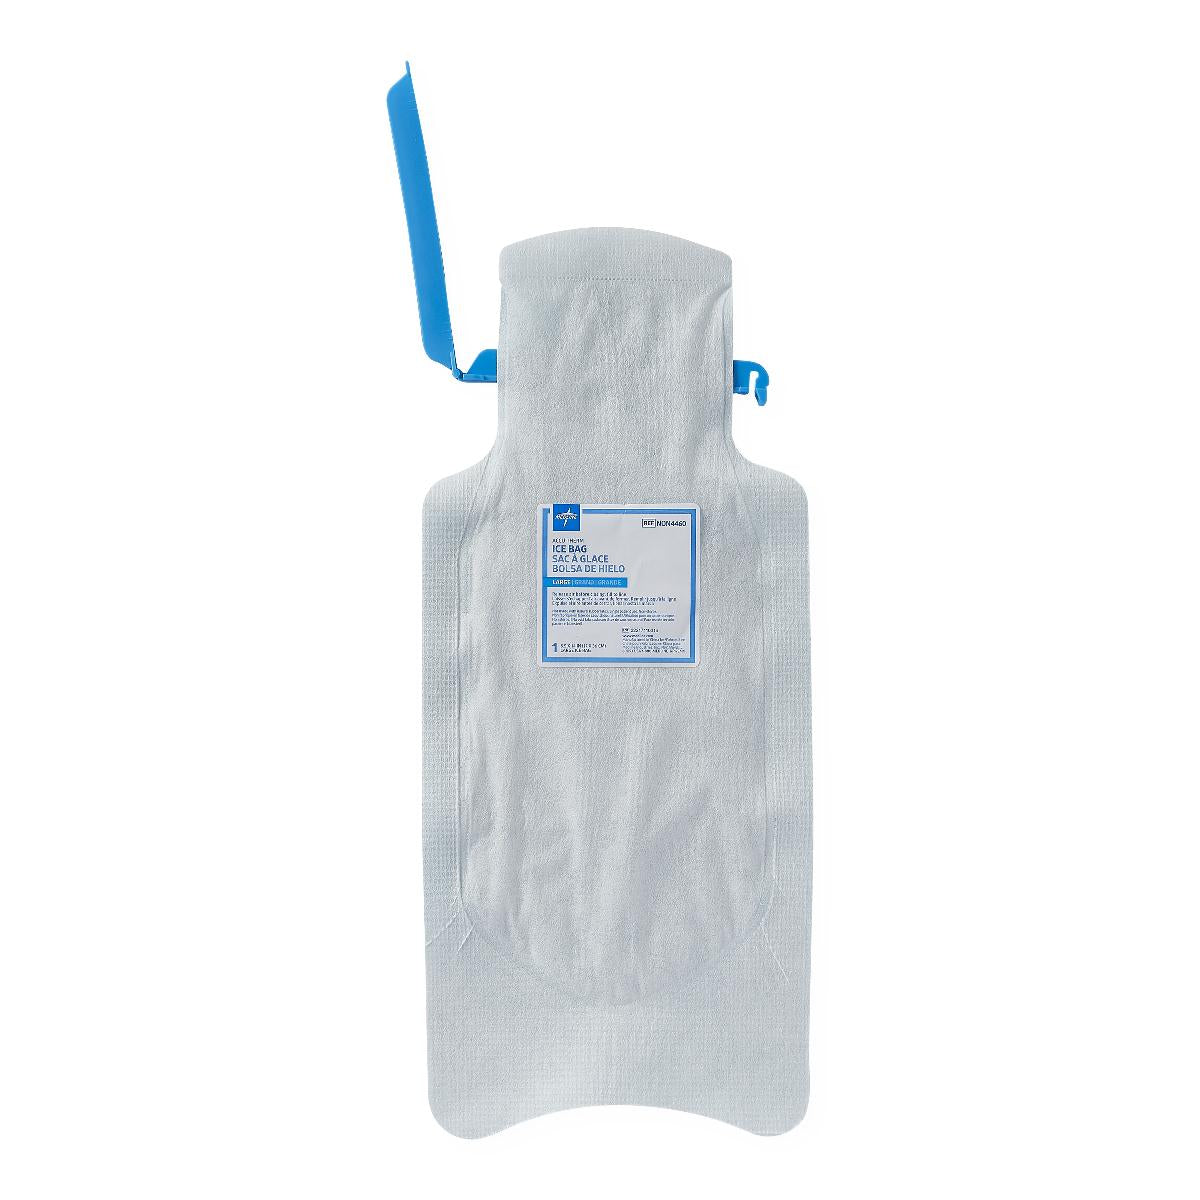 30 Bag-Case / Adjustable Elastic Straps / Clamp Physical Therapy - MEDLINE - Wasatch Medical Supply